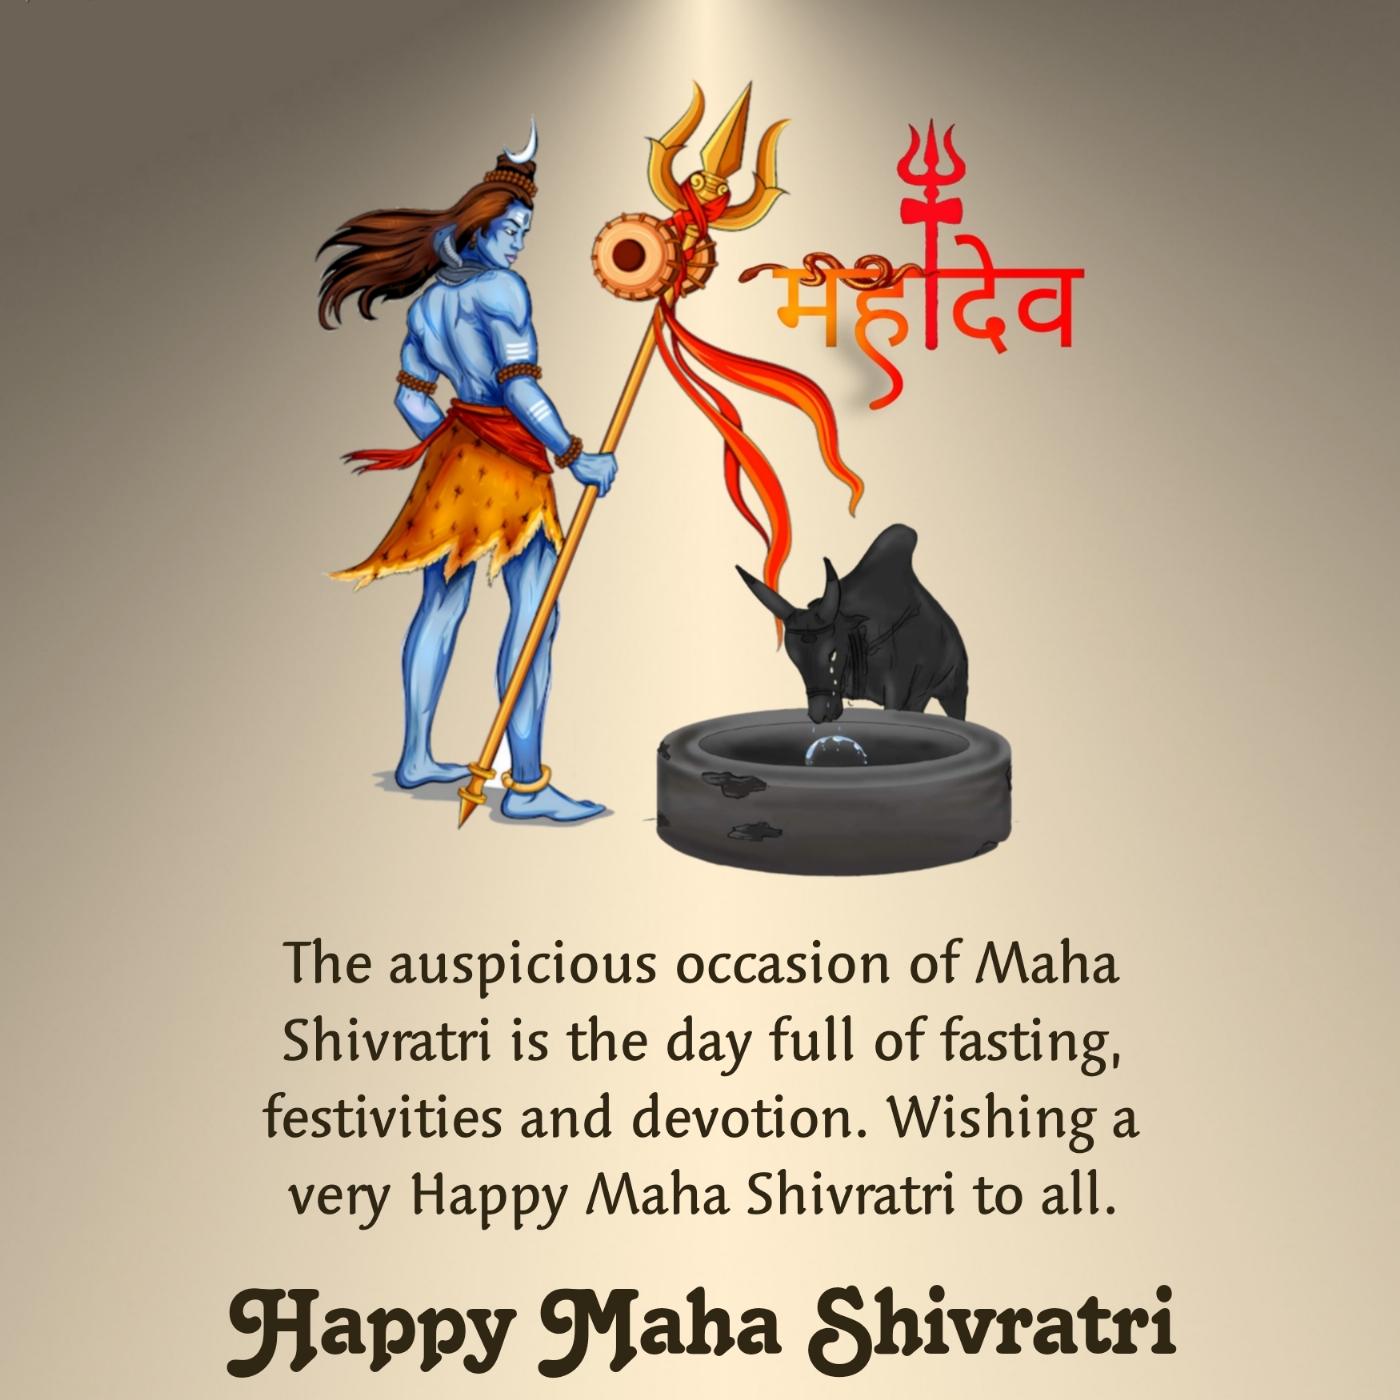 The auspicious occasion of Maha Shivratri is the day